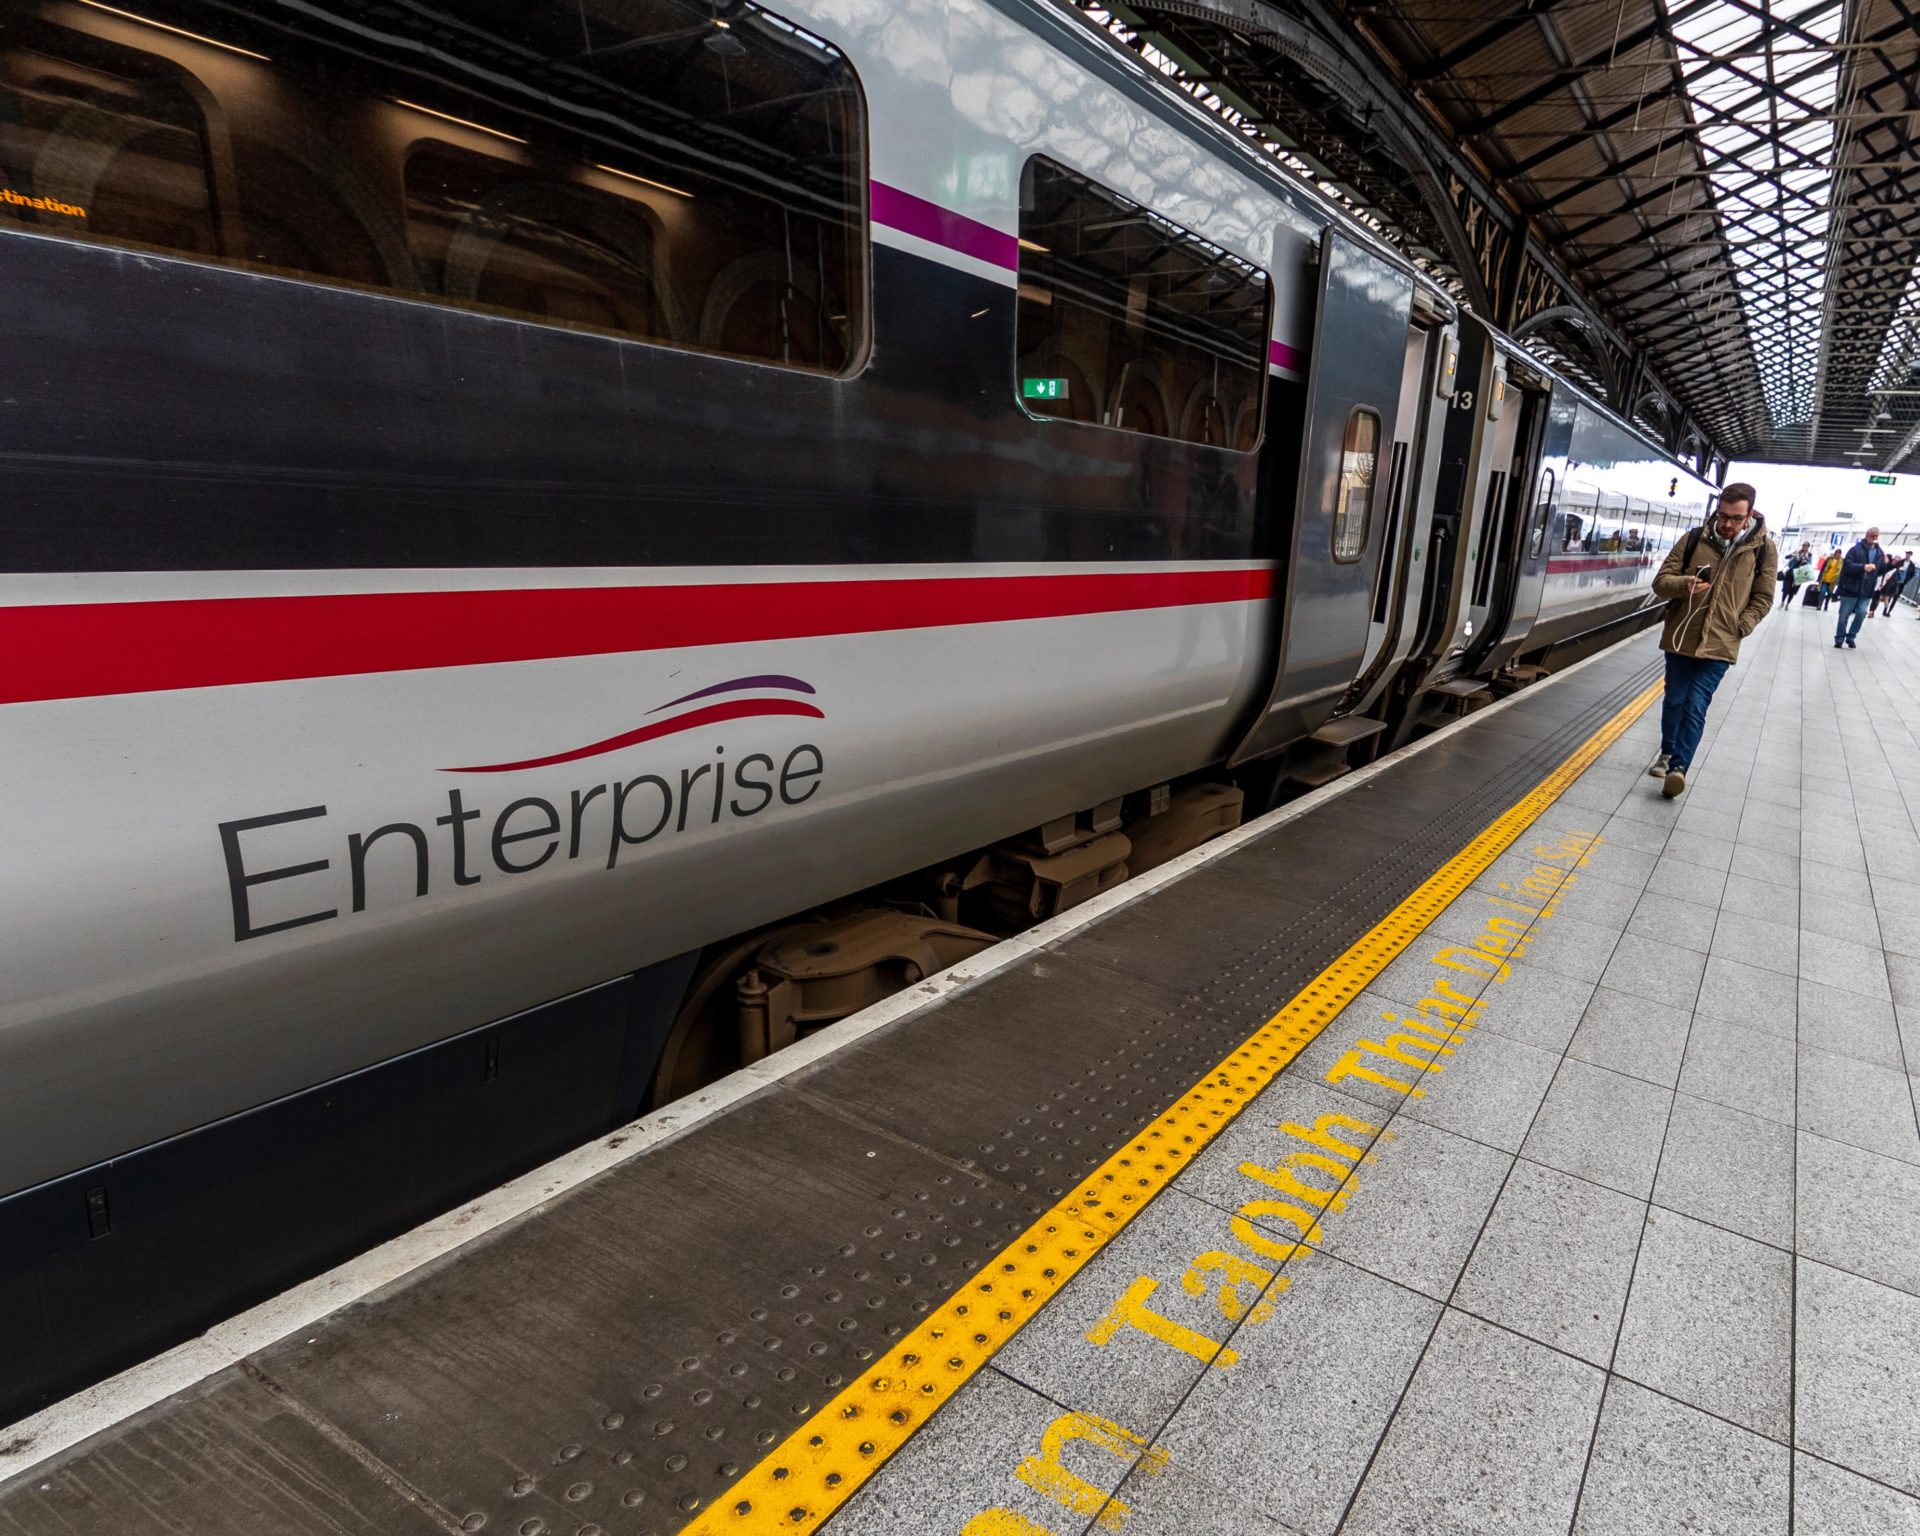 An Enterprise train from Belfast at Dublin's Connolly Station, 5-4-19.